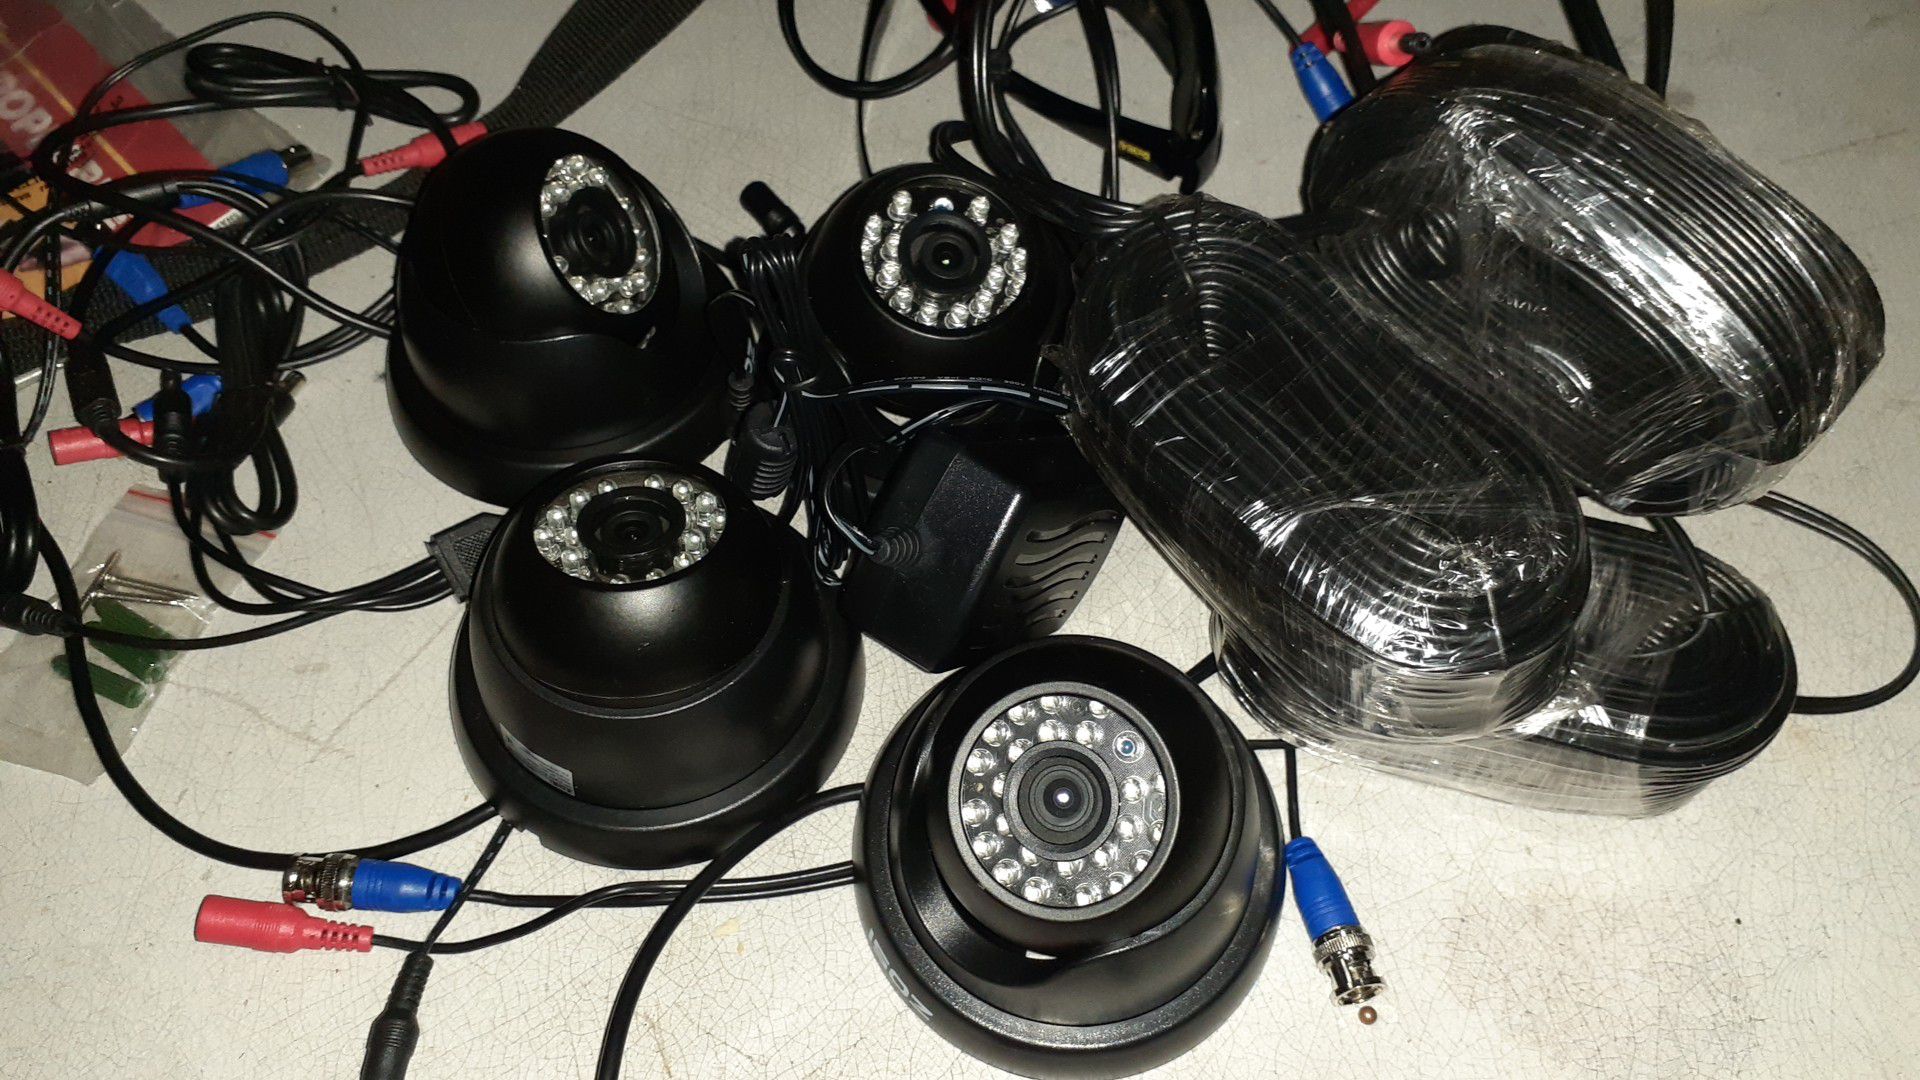 4 security cameras with 50 ft of cable each